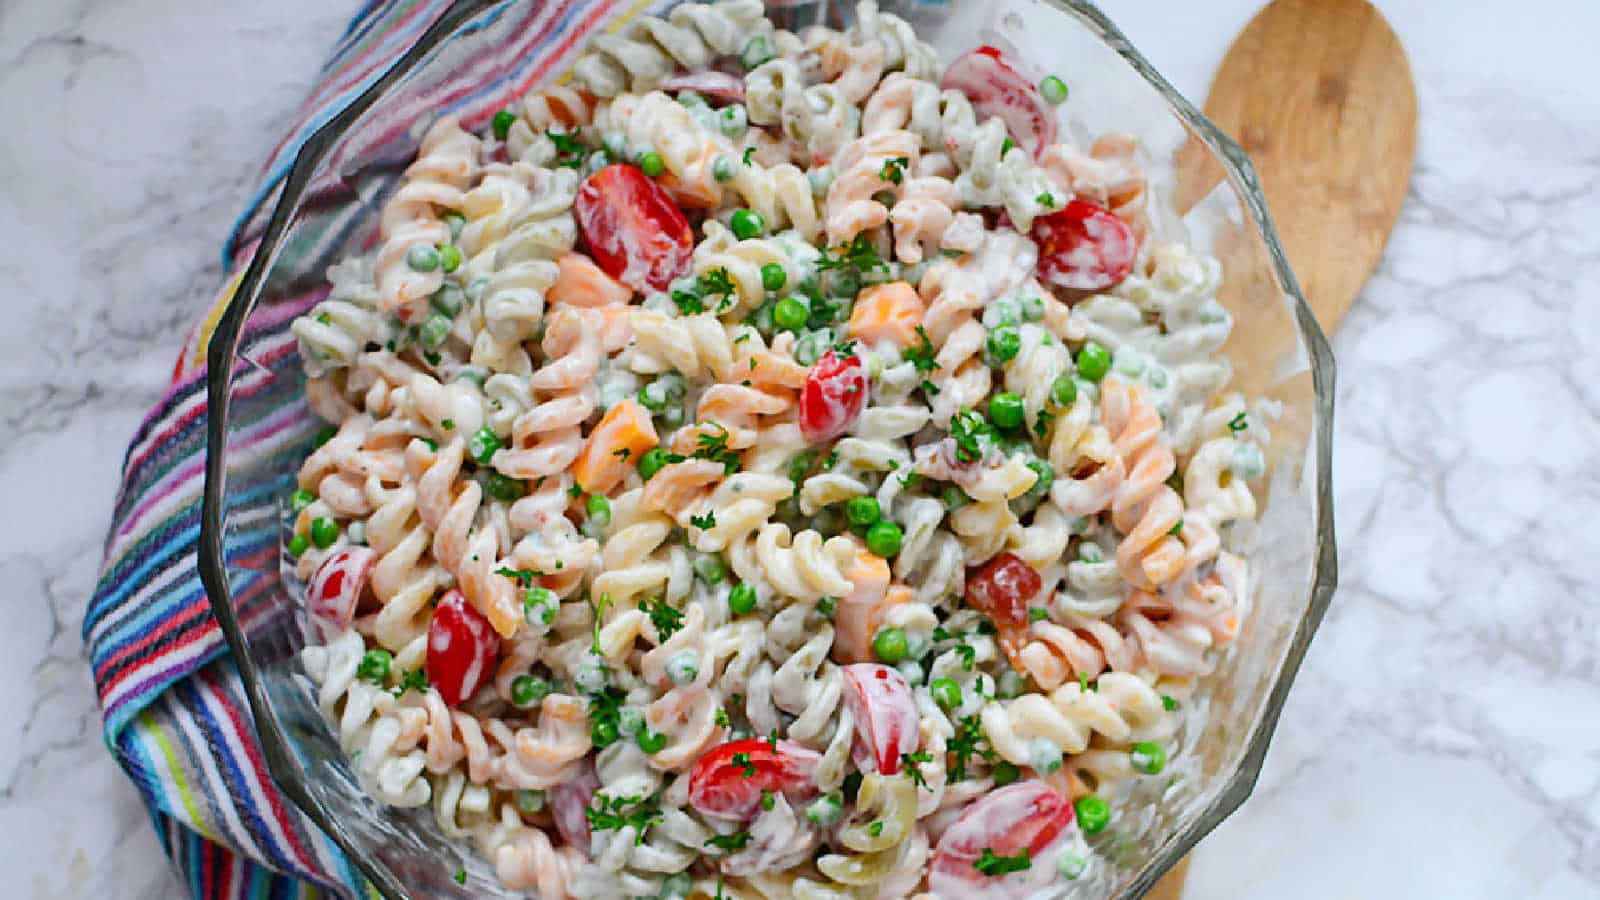 Bacon ranch pasta salad in a clear bowl with a striped towel.